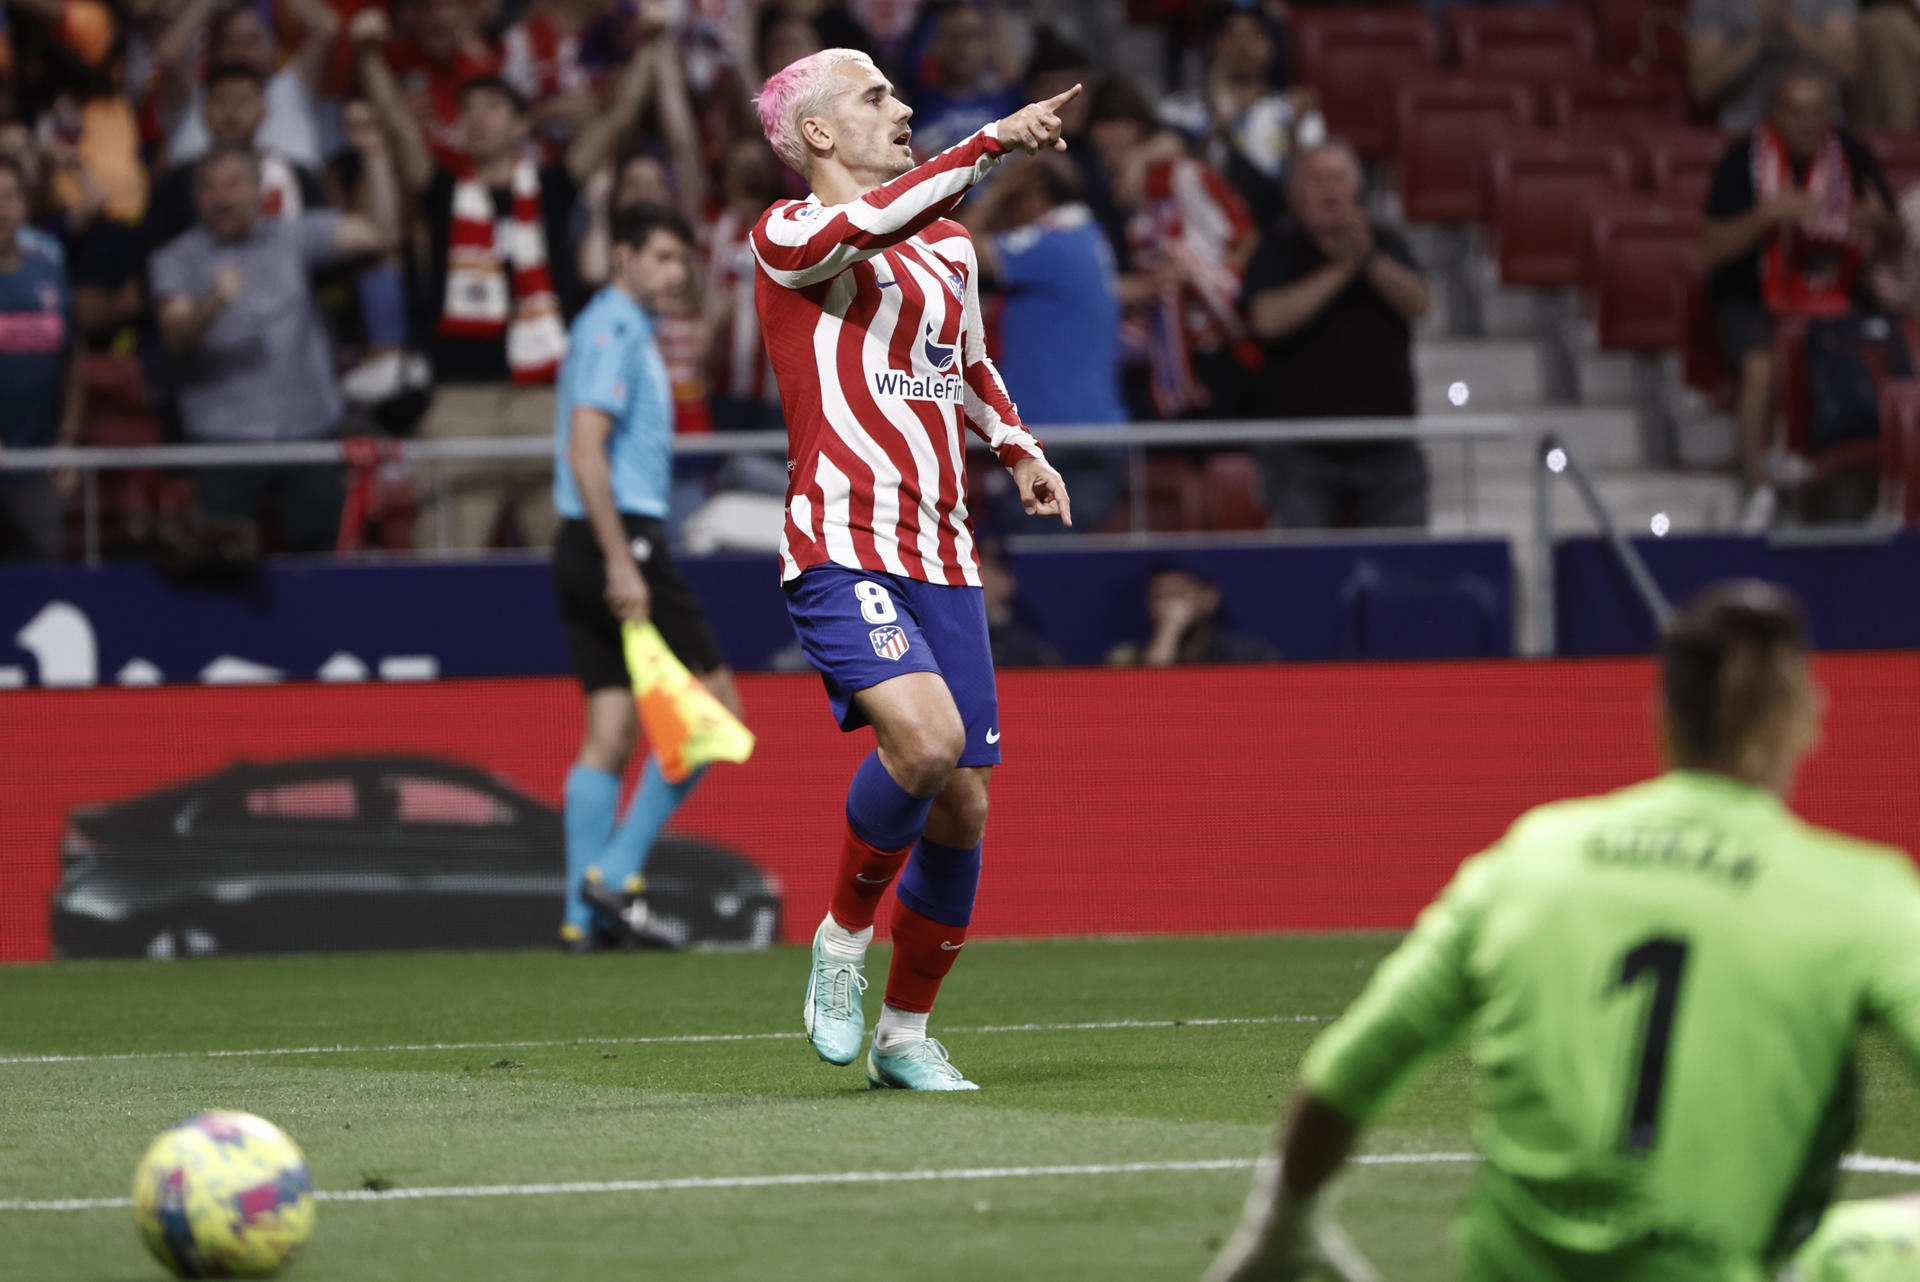 Atletico Madrid's Antoine Griezmann celebrates after scoring against Cadiz during a LaLiga match in Madrid on 3 May 2023. EFE/Sergio Perez